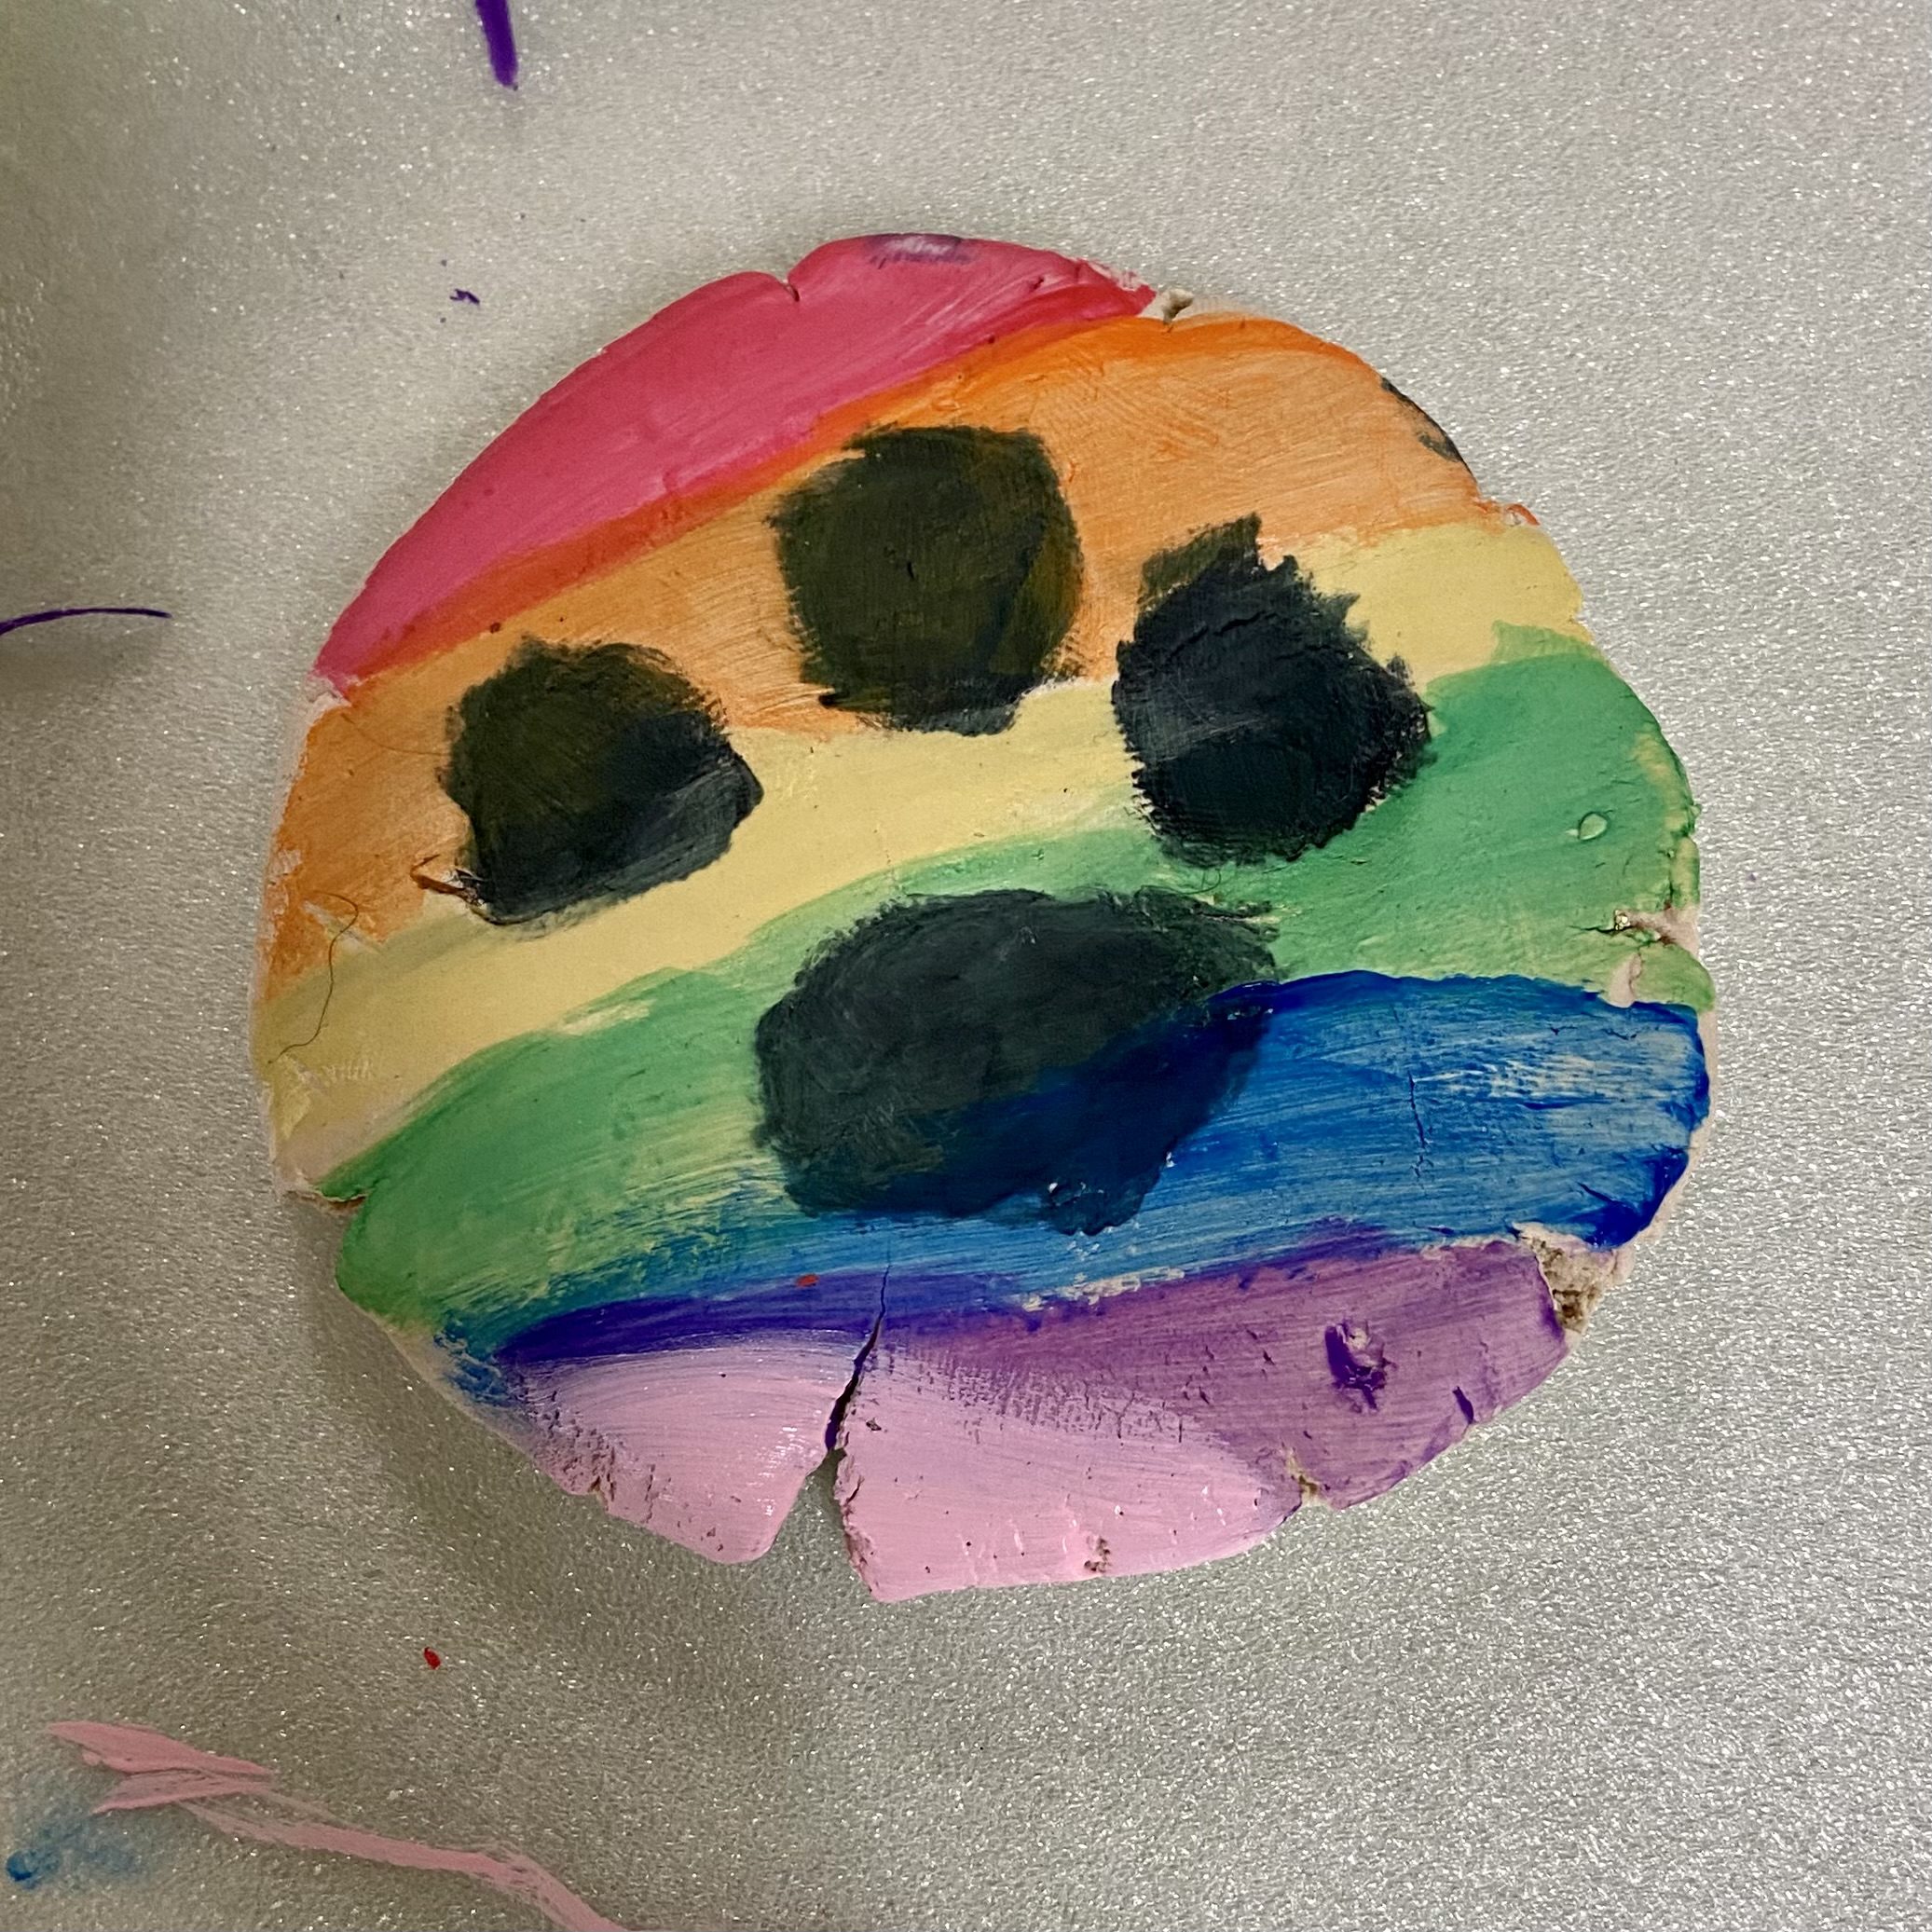 An adorable image of a round Christmas ornament painted with a rainbow and dog paw print by girl scouts.